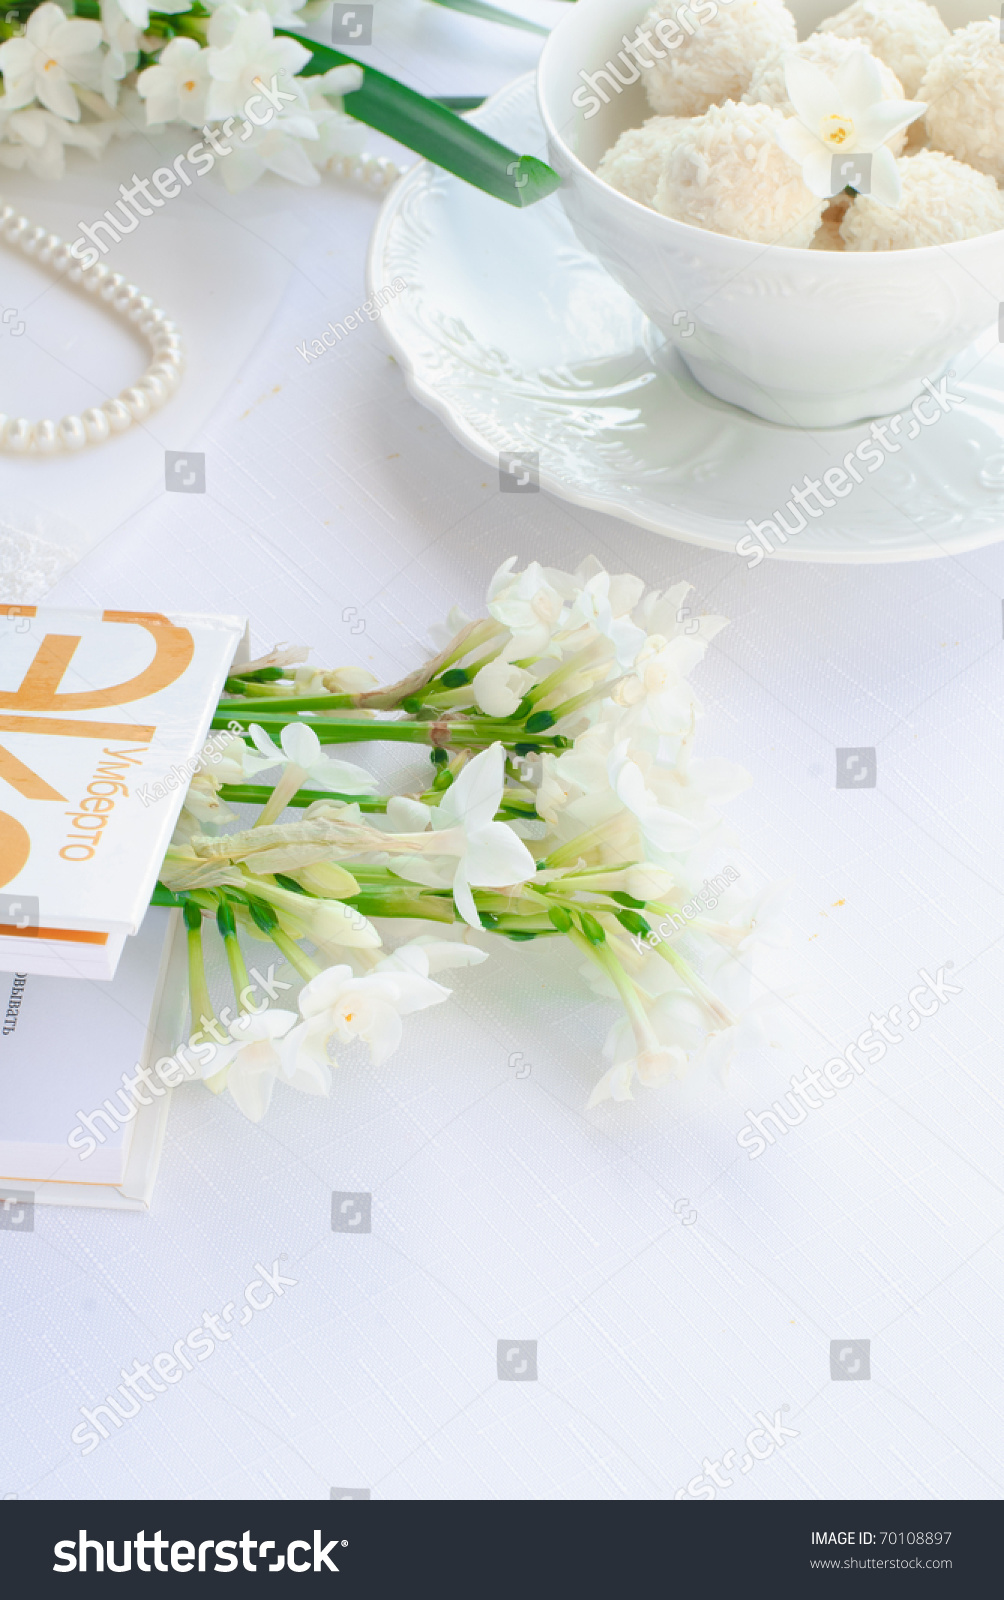 white narcissus, book, white cup with candies #70108897